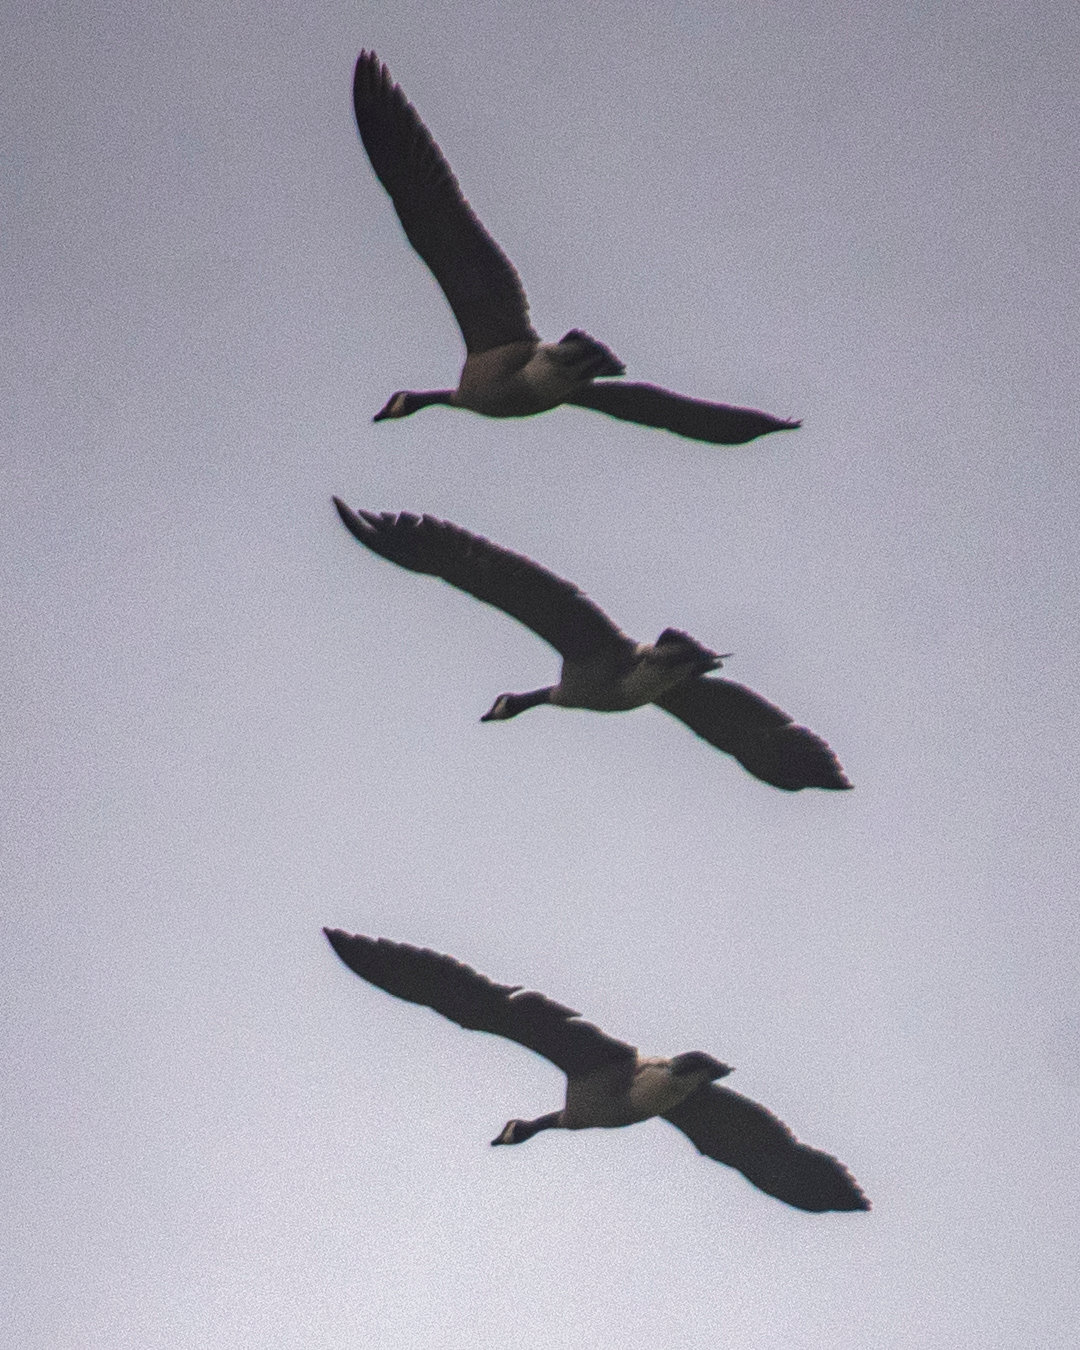 Geese fly over the Black River on Tuesday.